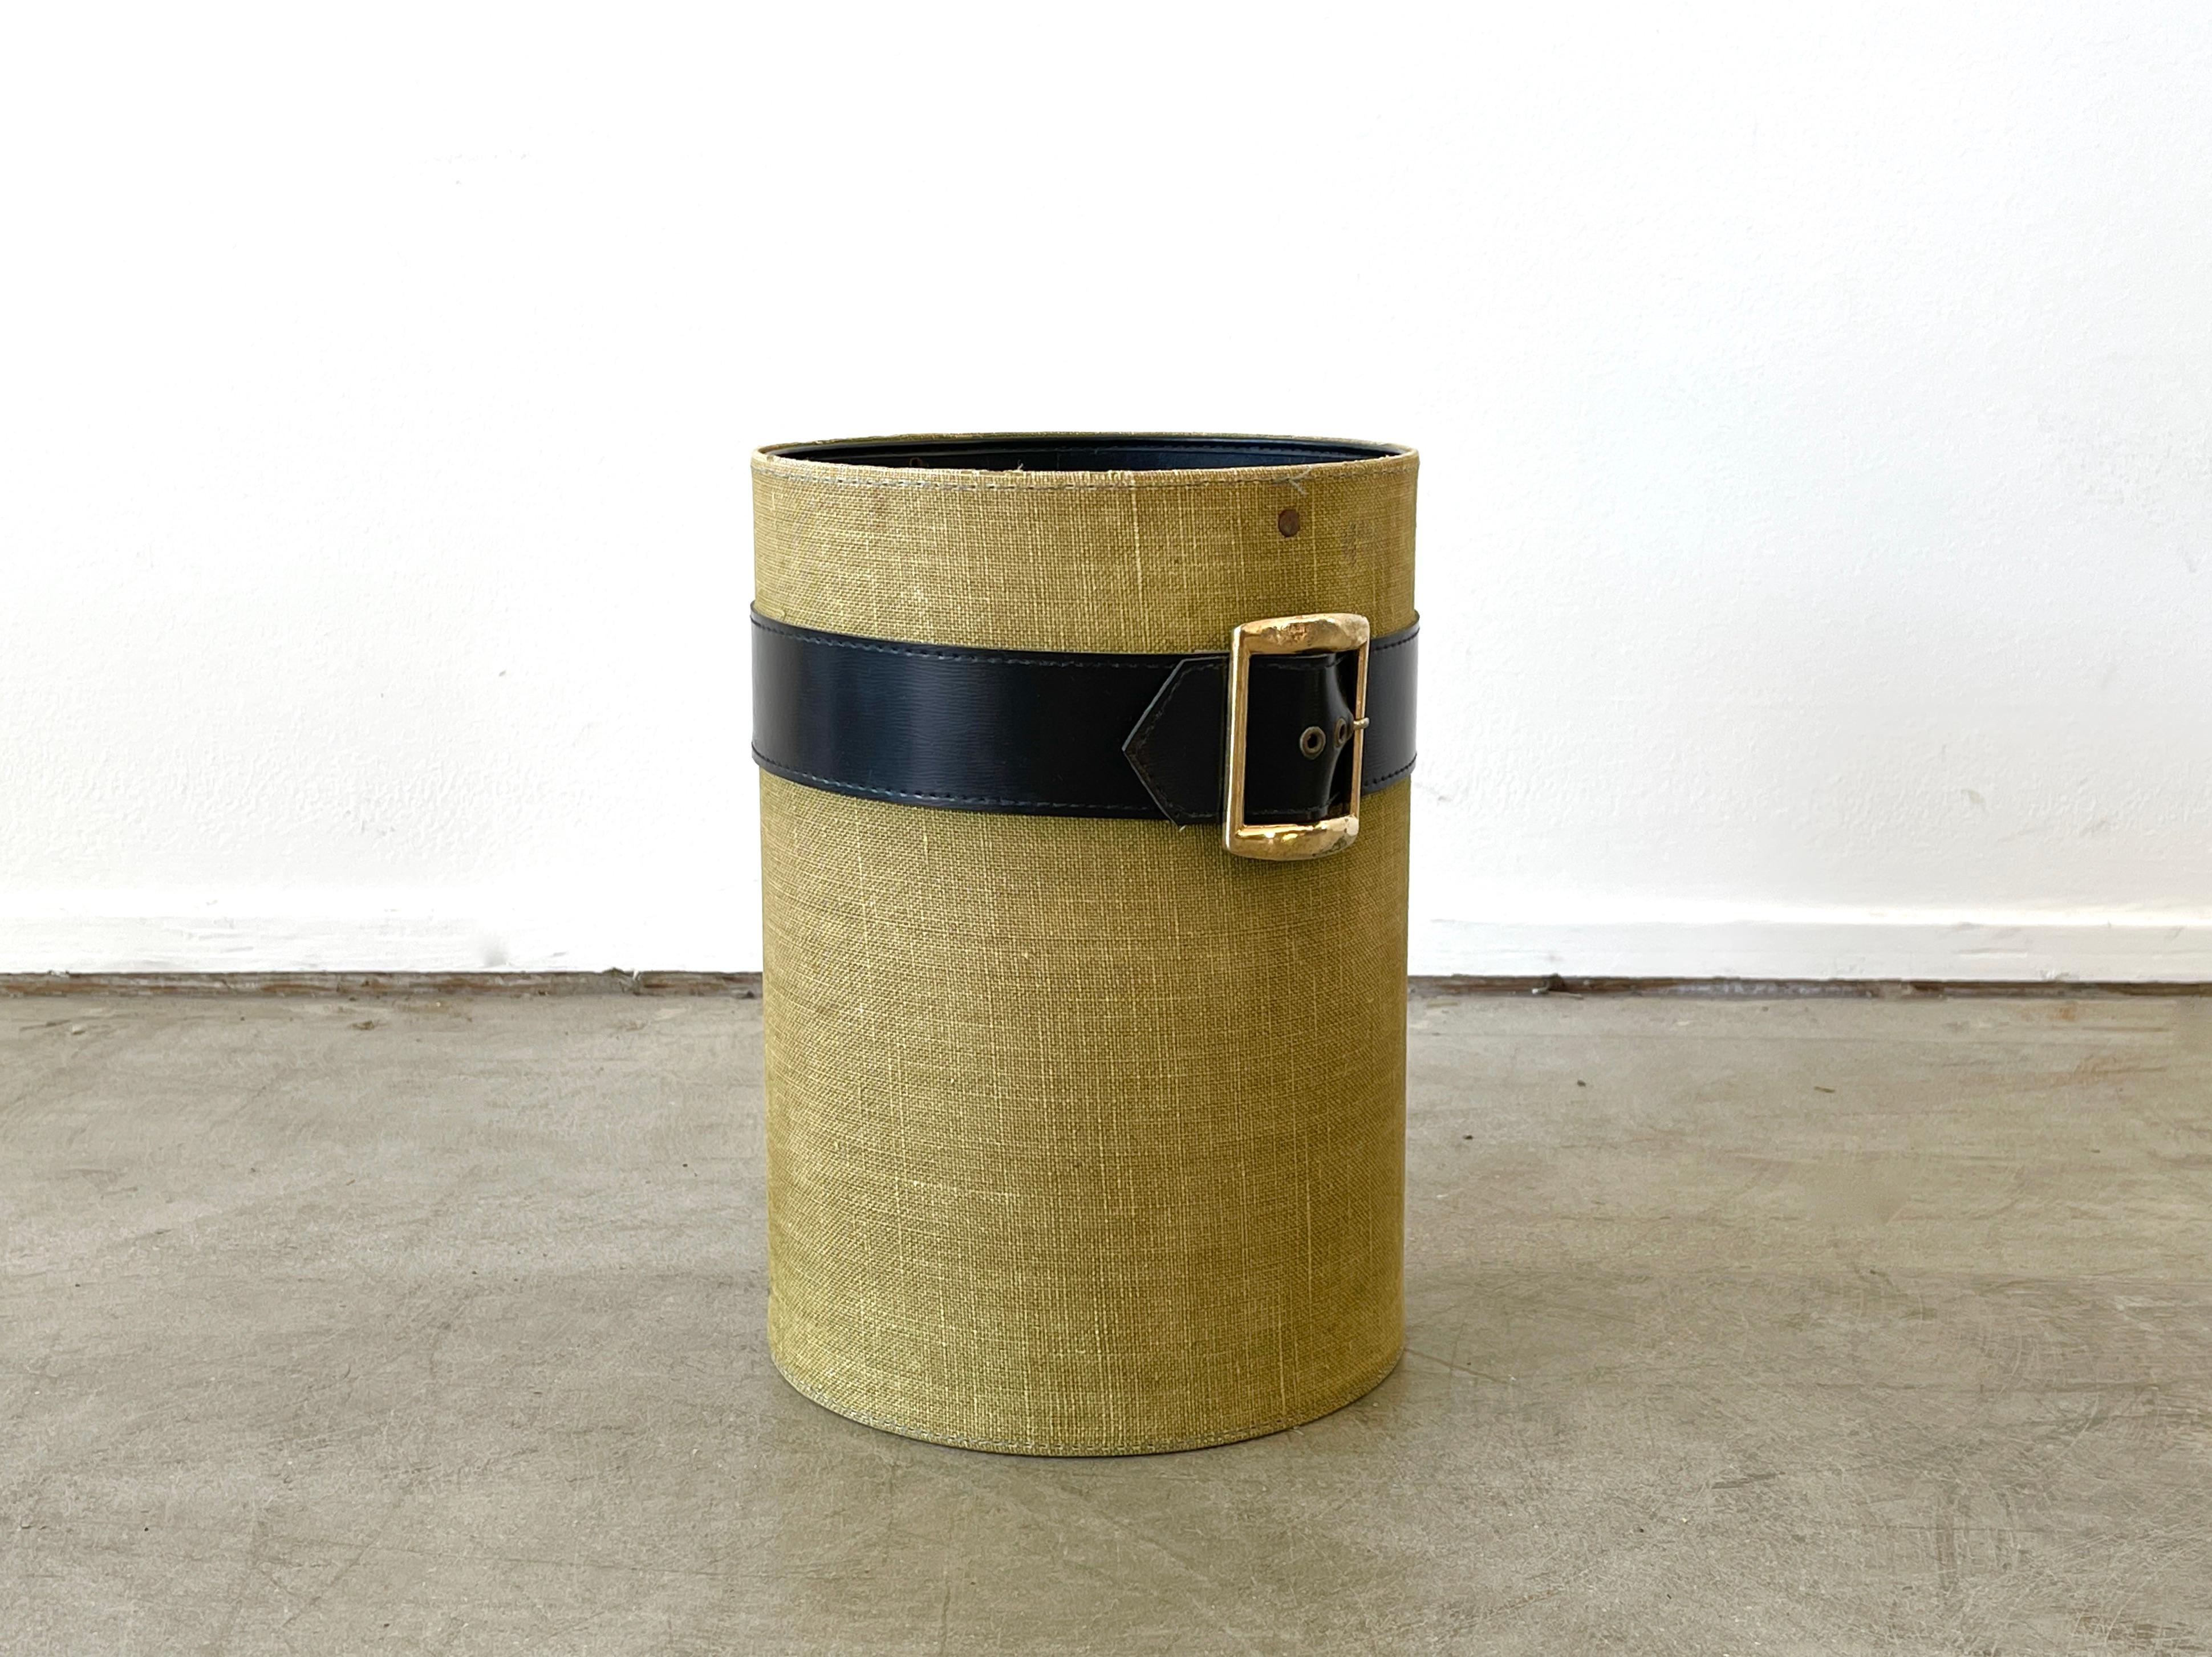 Handsome waste bin attributed to Jacques Adnet with woven fabric and leather strap/buckle.